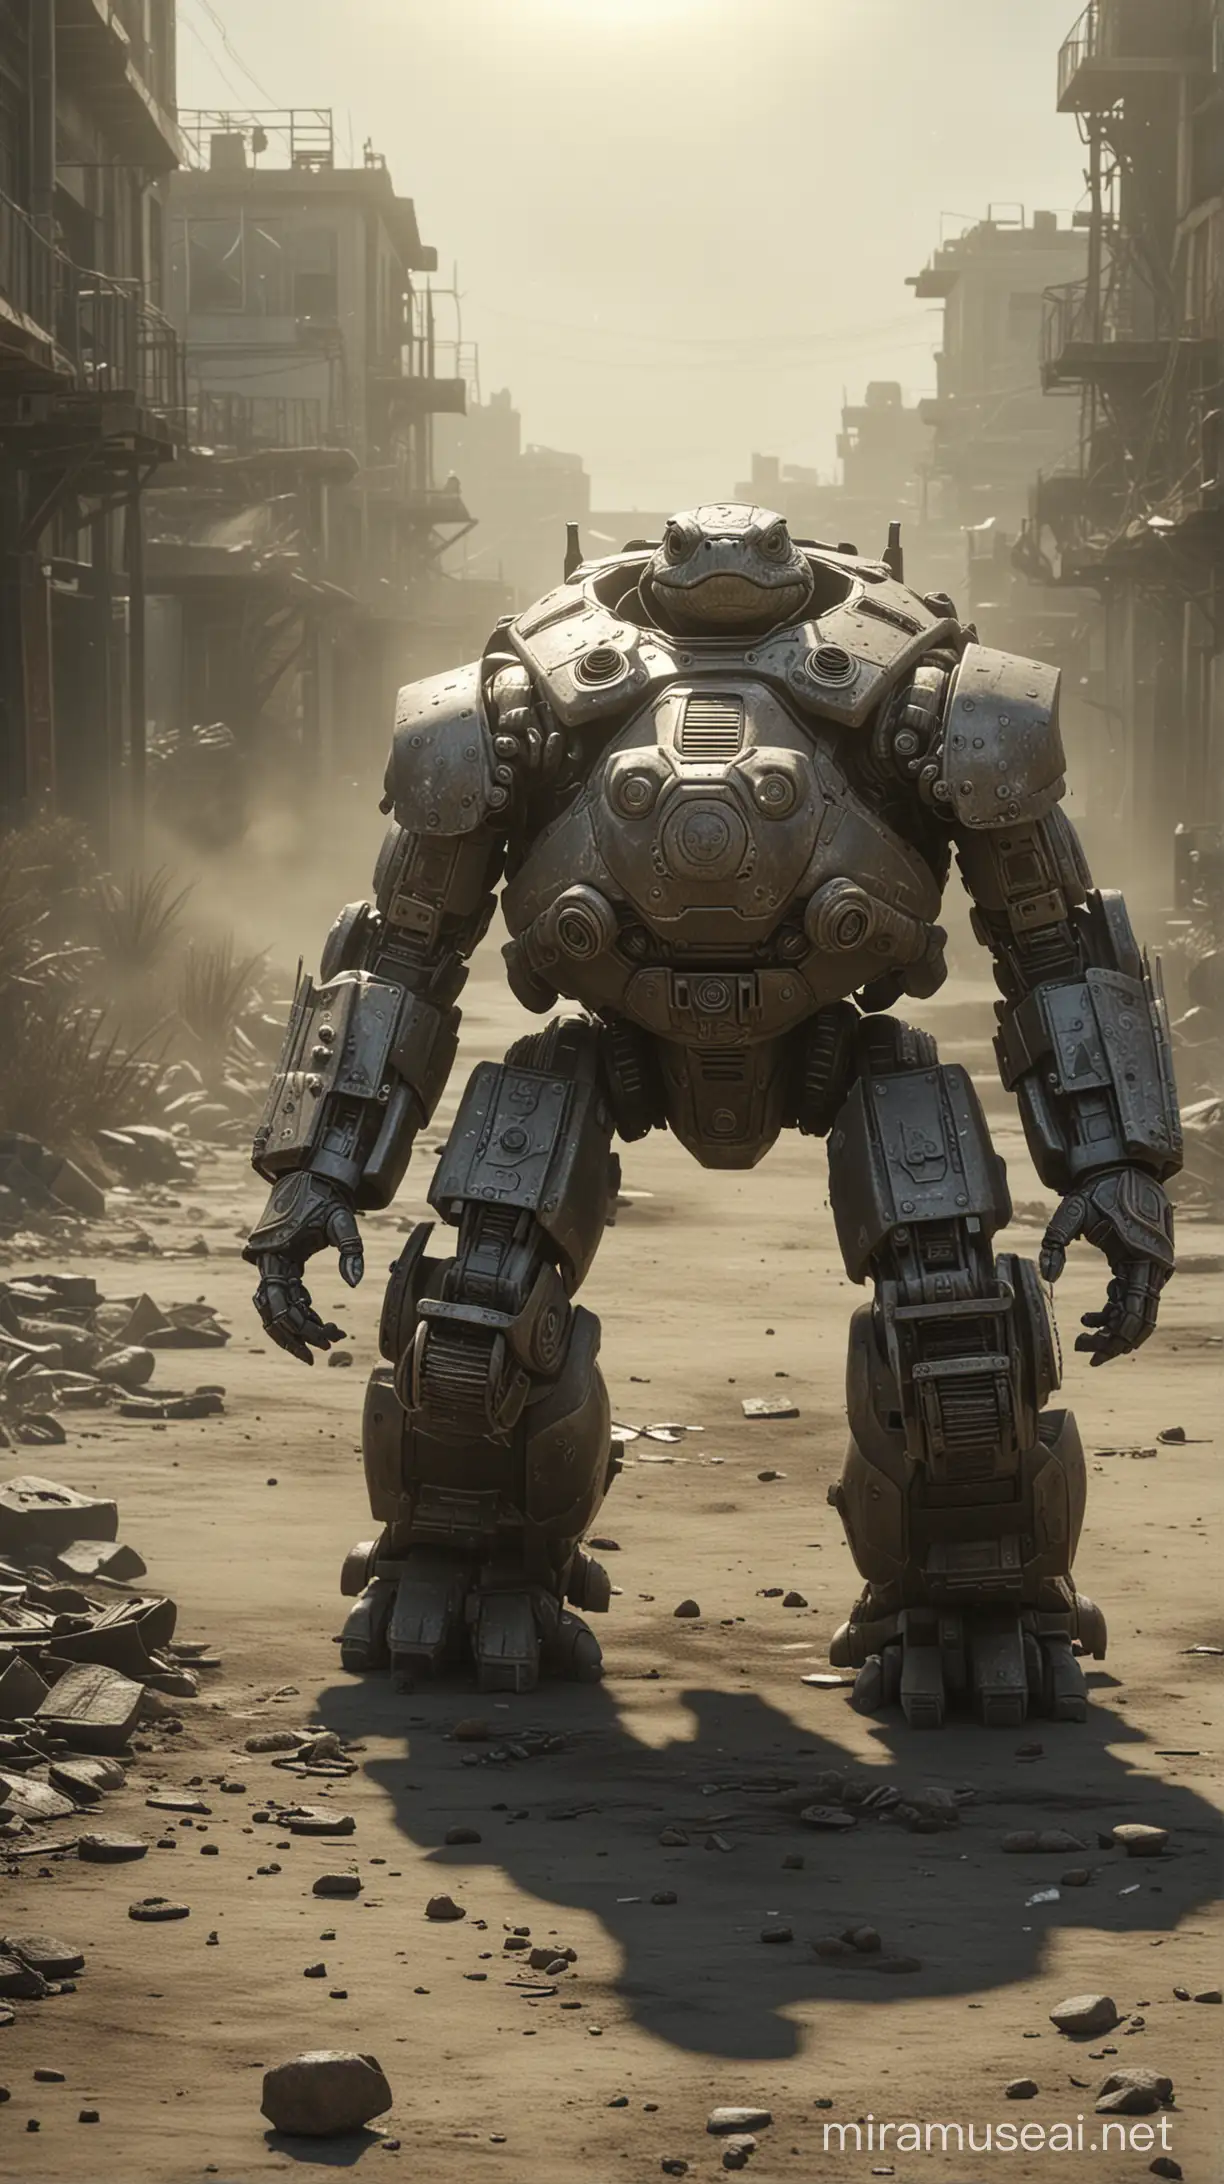 Epic Mecha Turtle in Fallout War Scene Cinematic Still with Dust and Particles